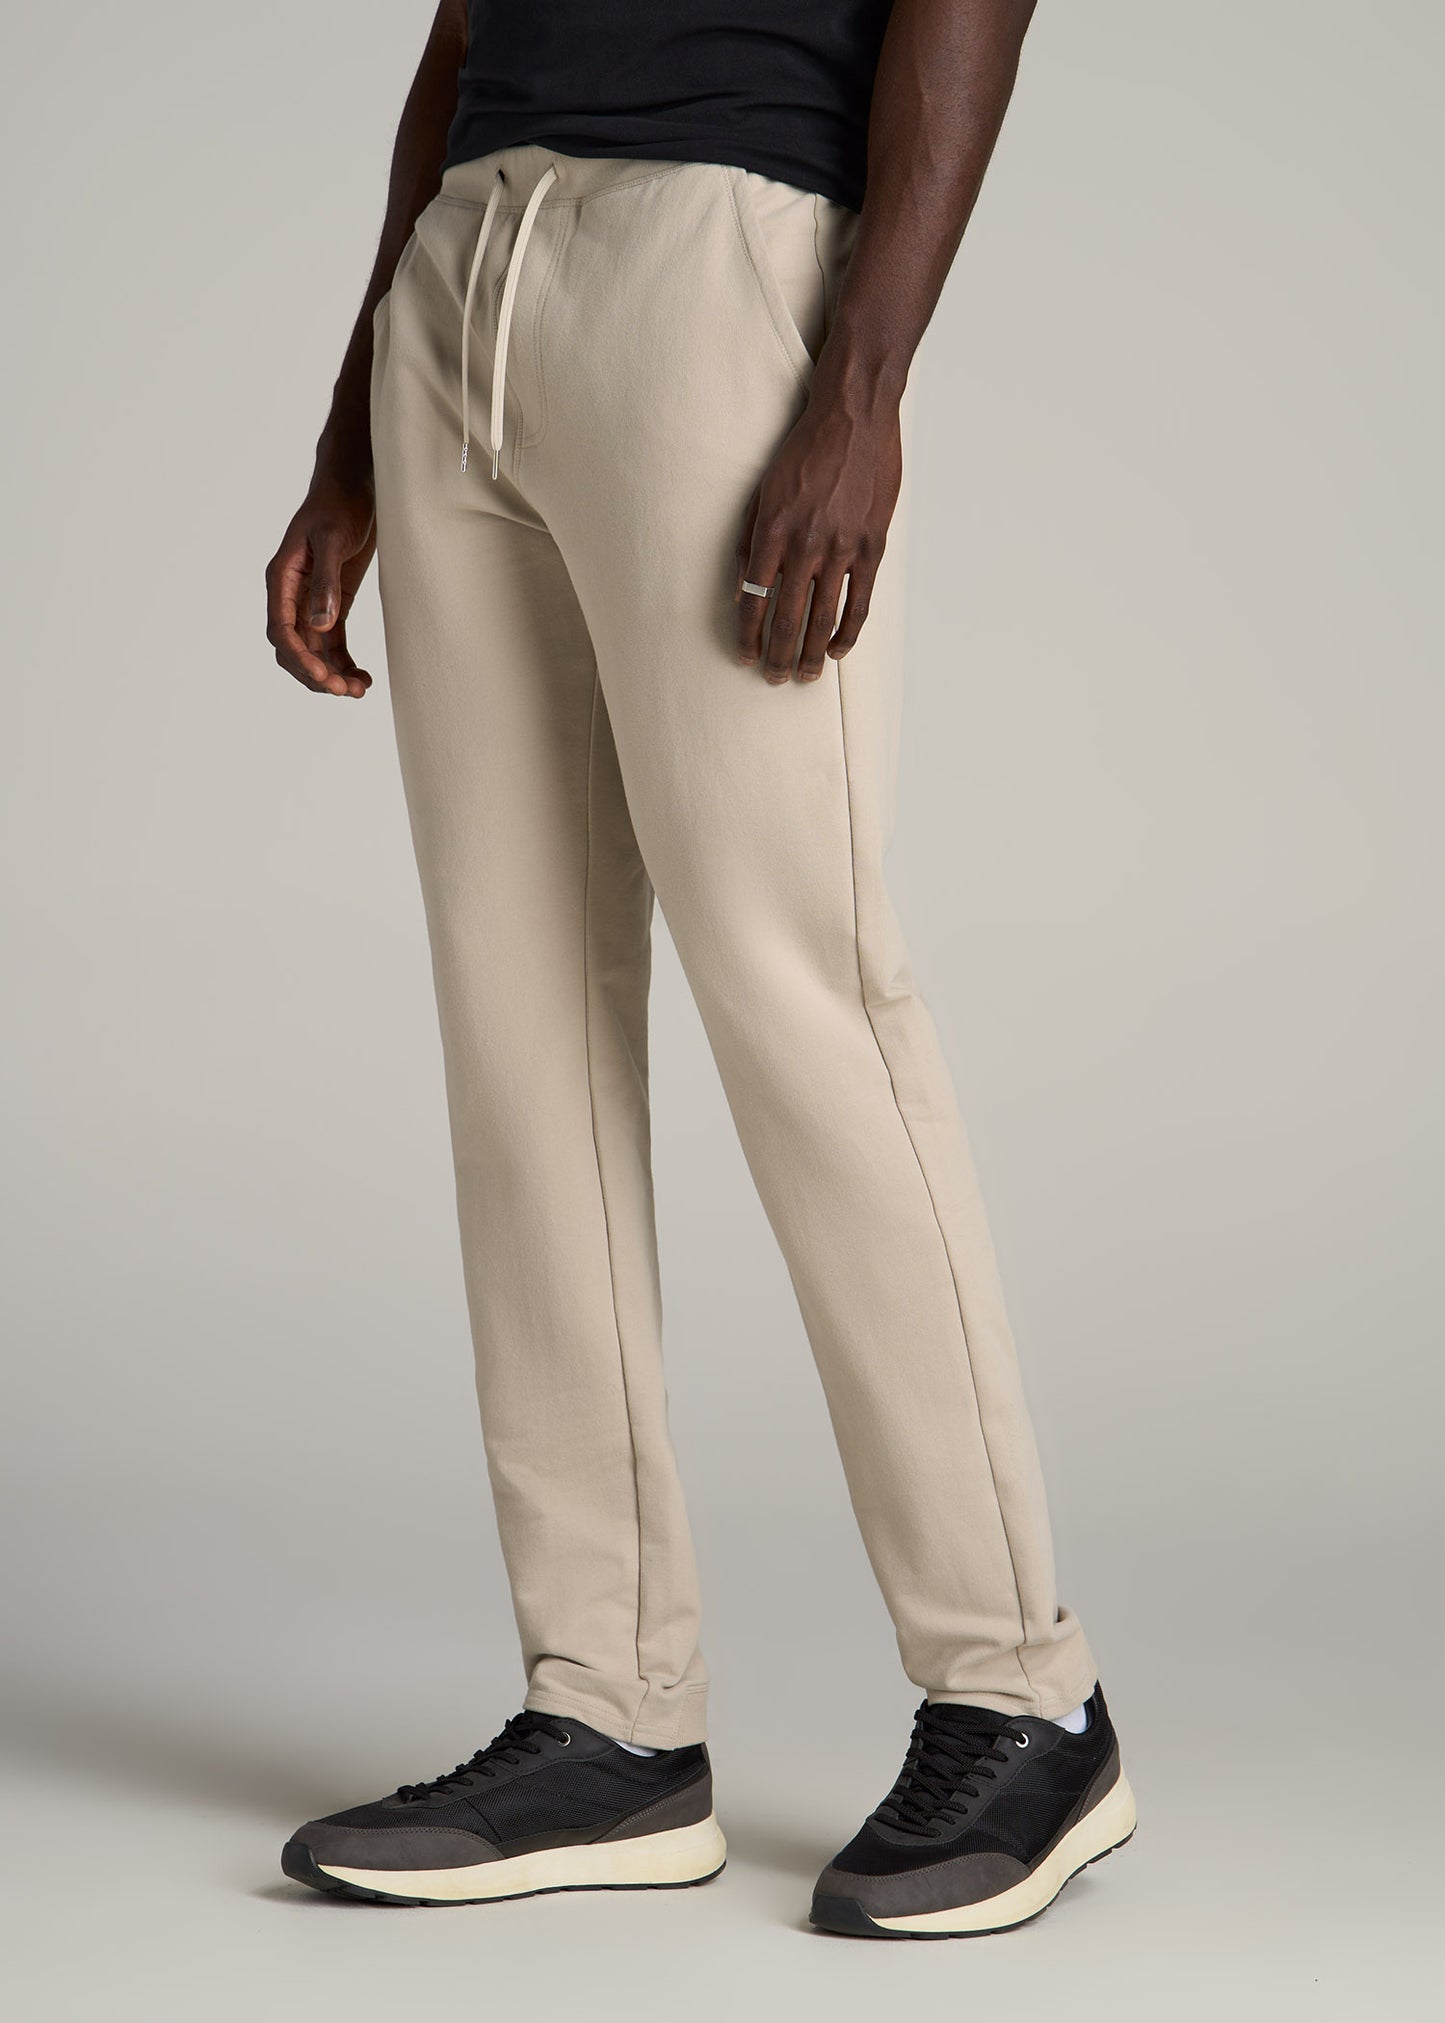 A tall man wearing American Tall's Microsanded French Terry Sweatpants For Tall Men in Stone.